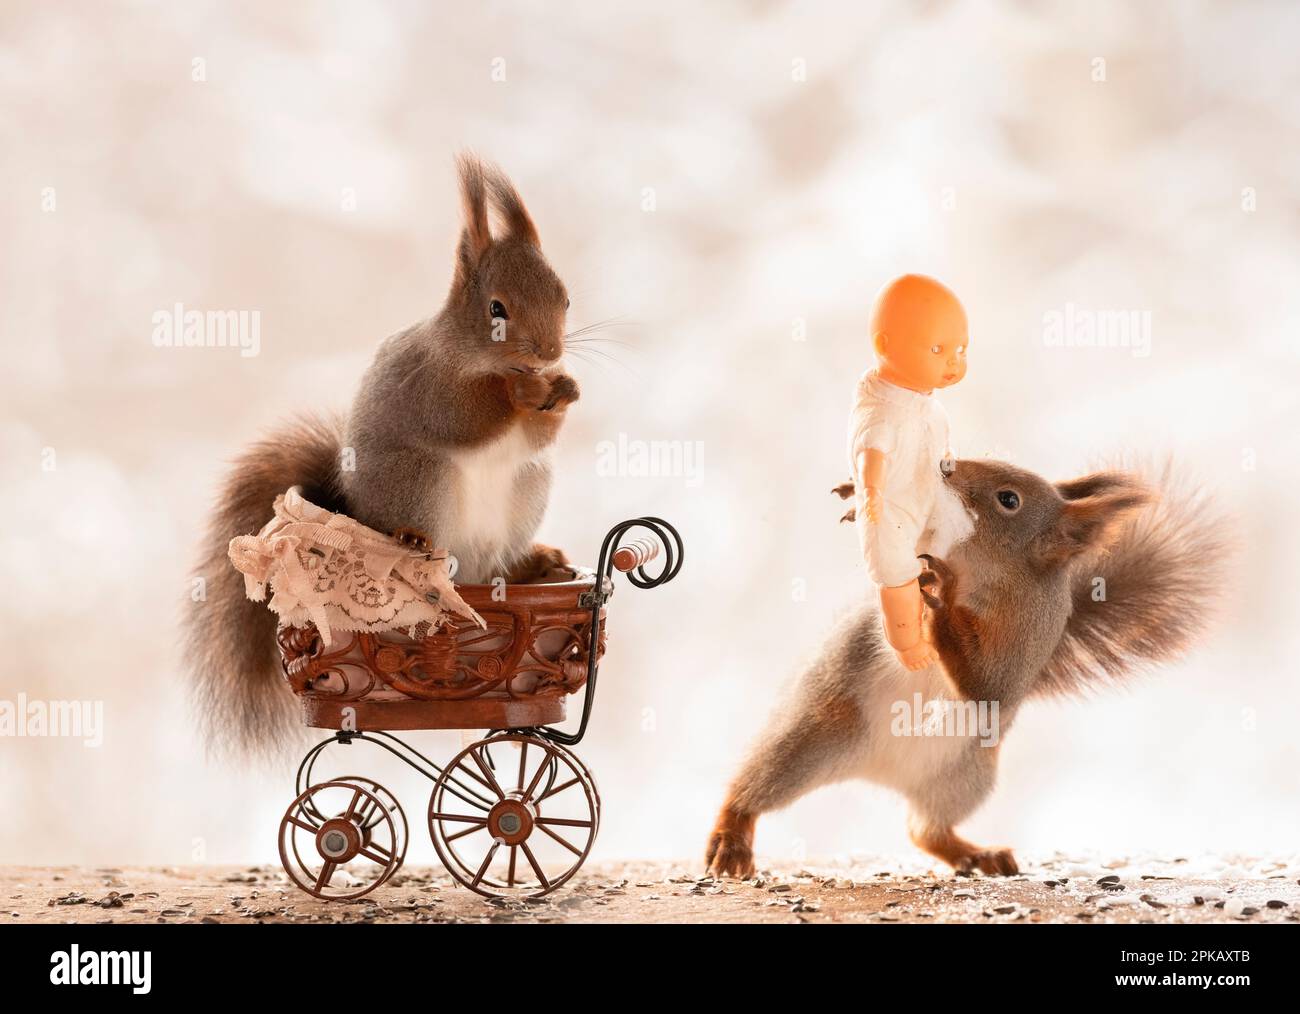 Red Squirrels with an stroller and baby doll Stock Photo